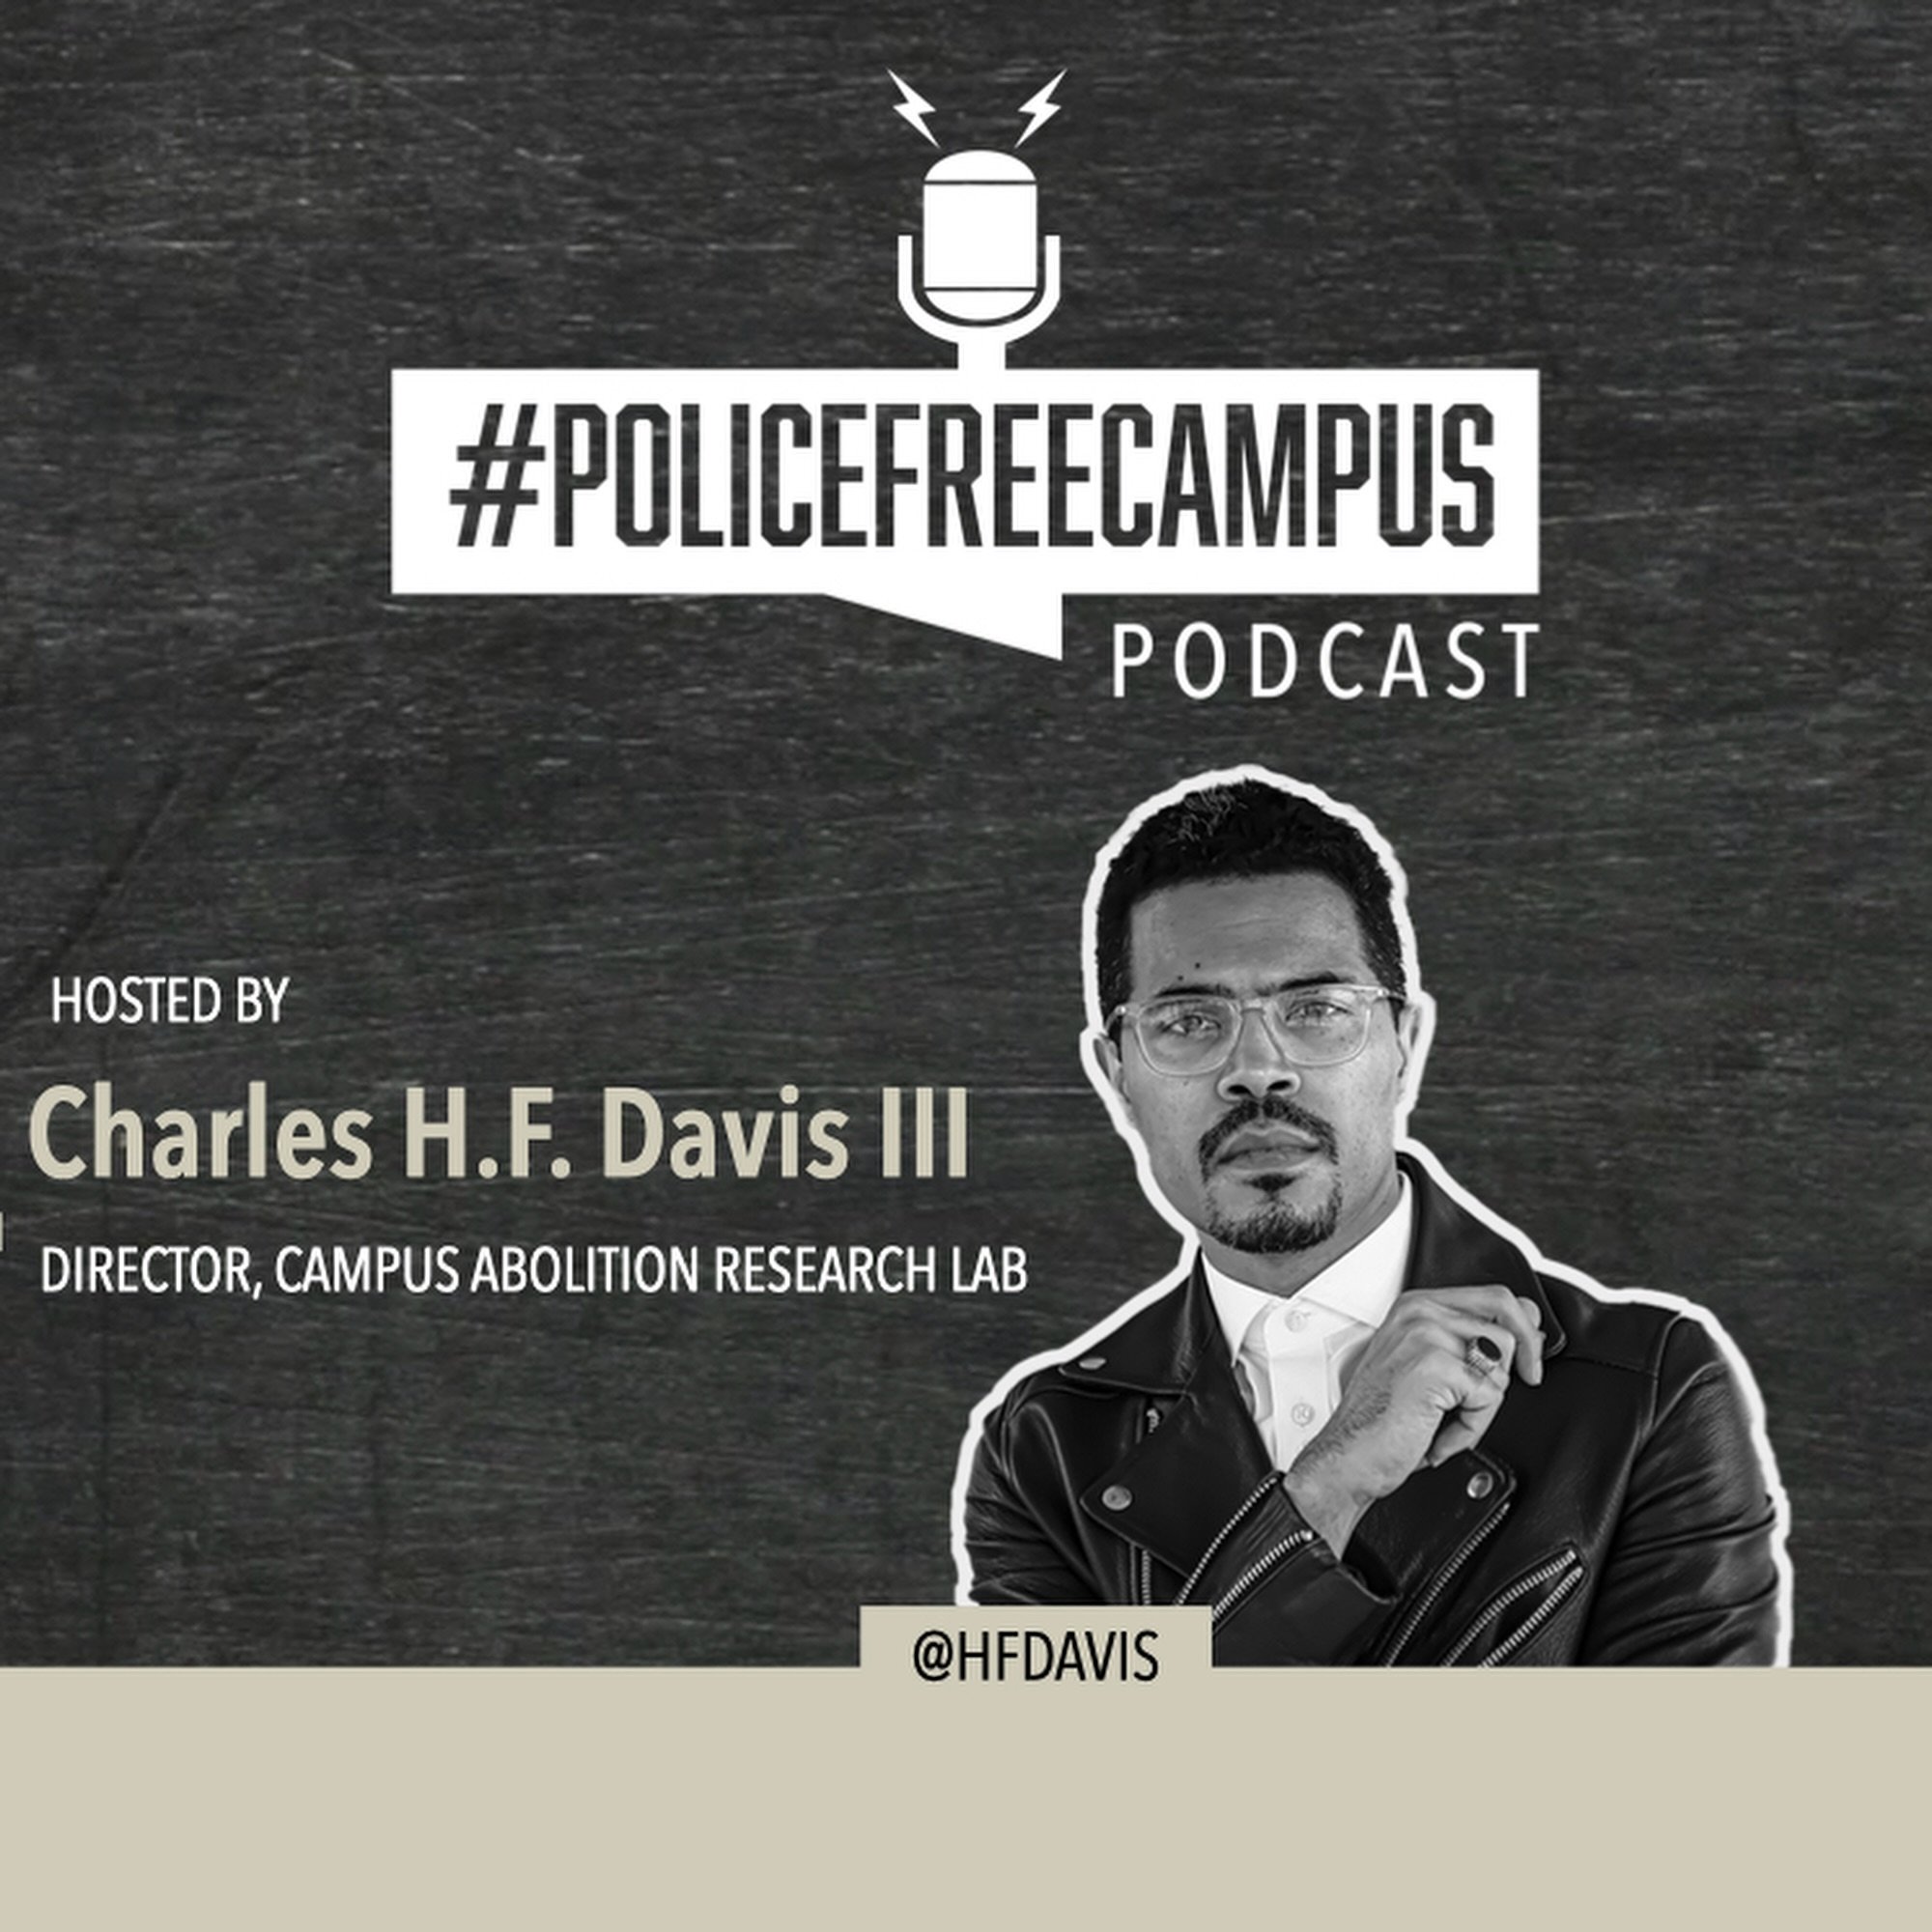 Welcome to the #PoliceFreeCampus Podcast!

This series brings together comrades and colleagues working to reimagine colleges, universities, and a world without police.

Building on the work initiated by the @S4BLCollective , which introduced the #Pol